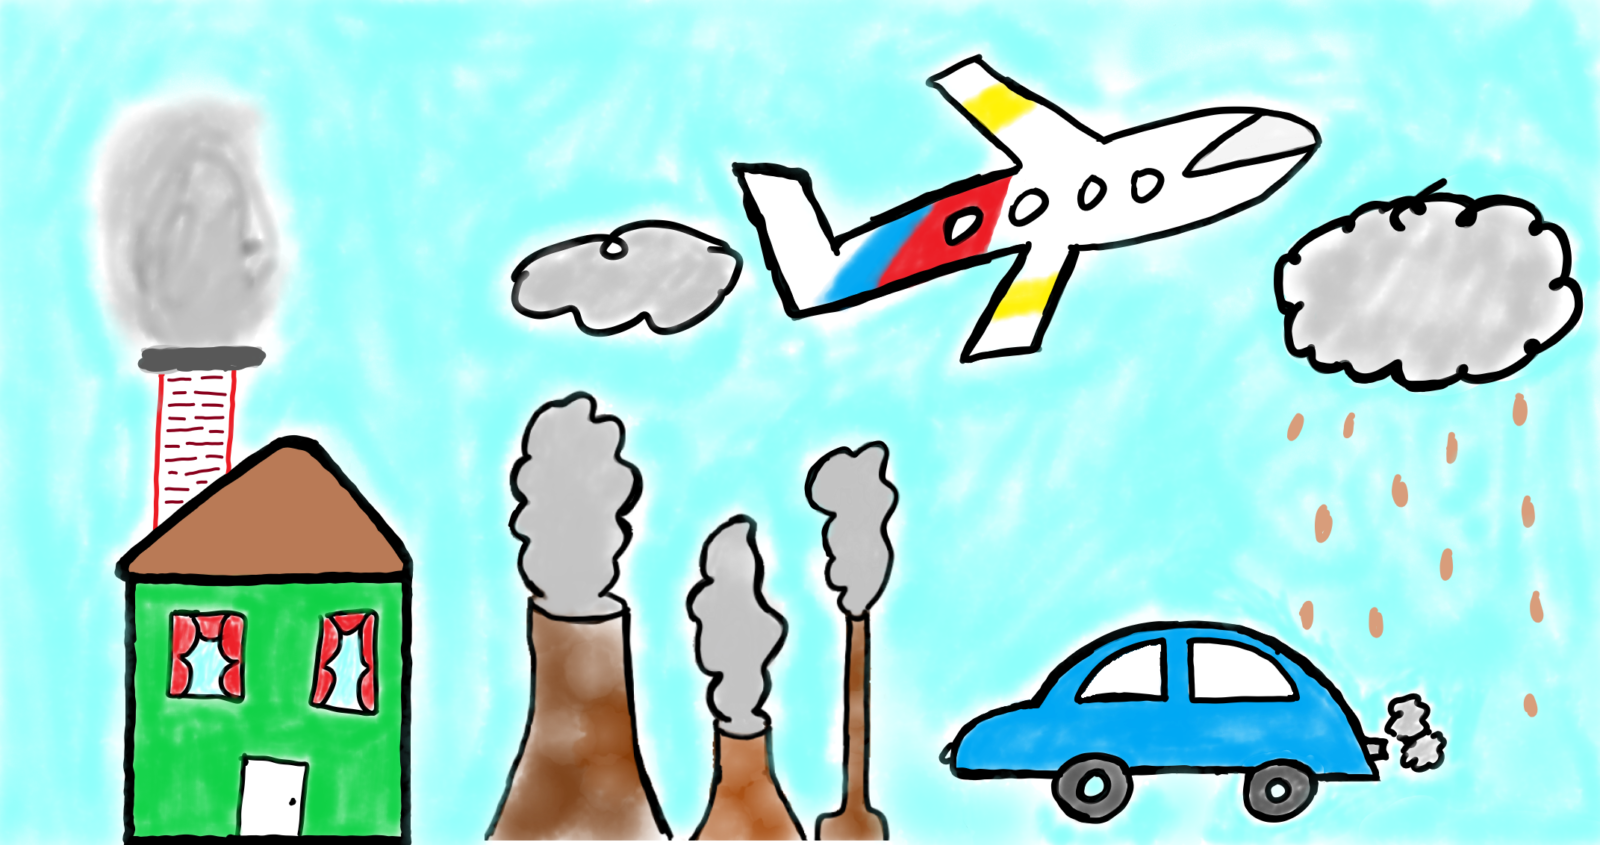 Clip art of a air pollution | Clipart Panda - Free Clipart Images